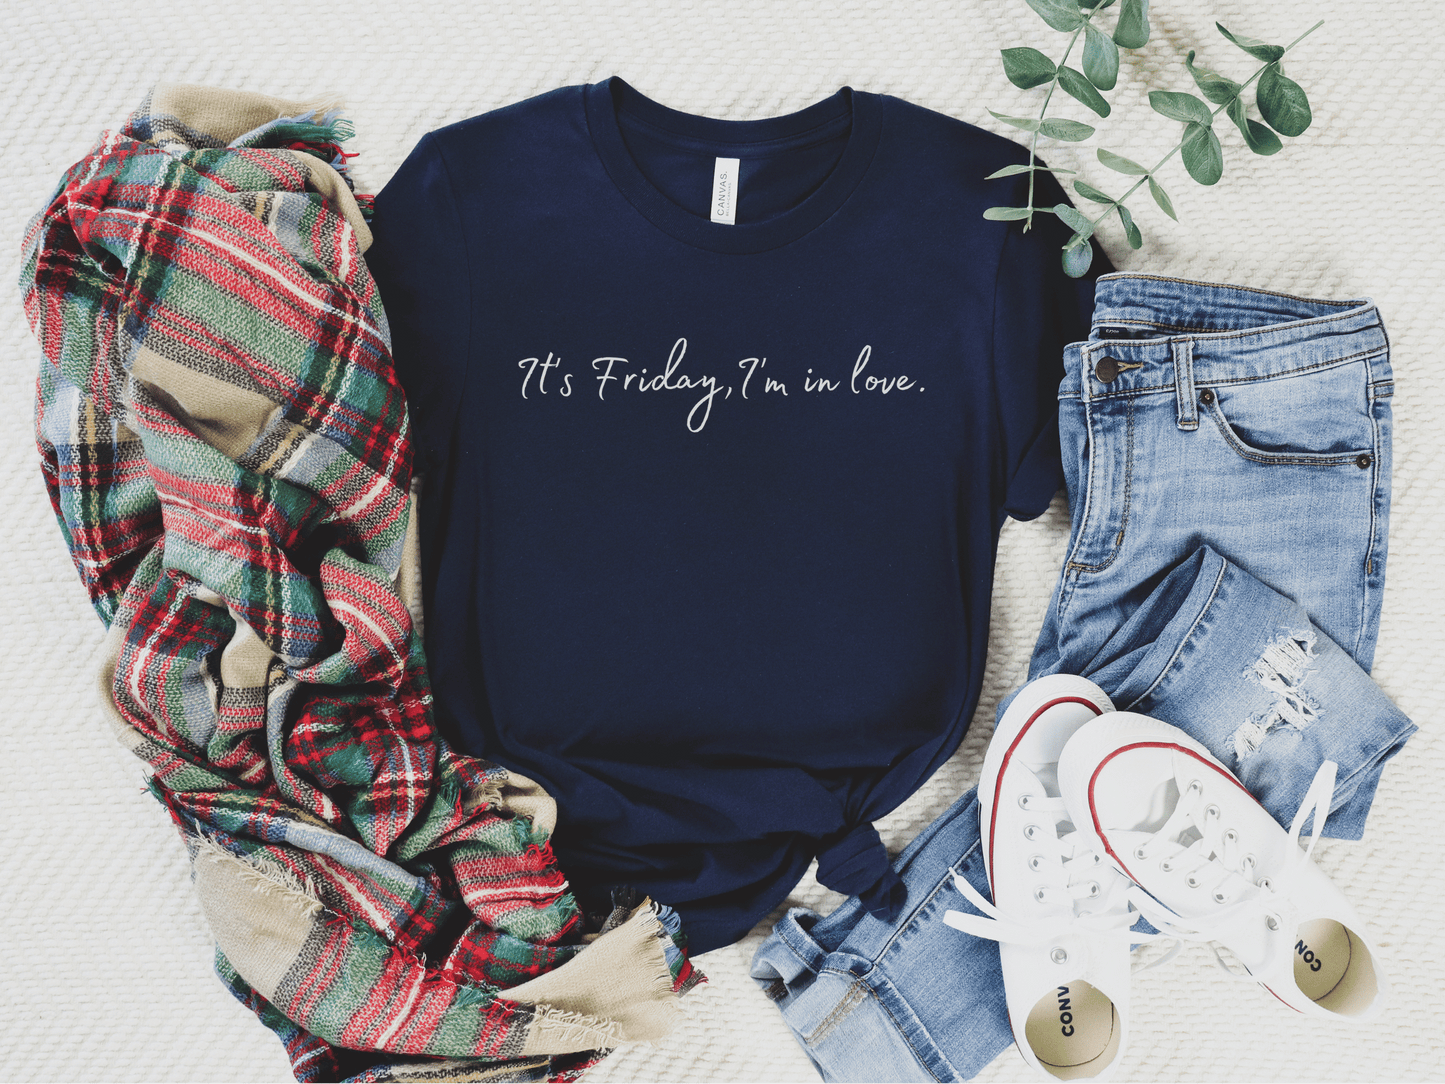 The Cure "Friday Im in Love " T-Shirt in Navy